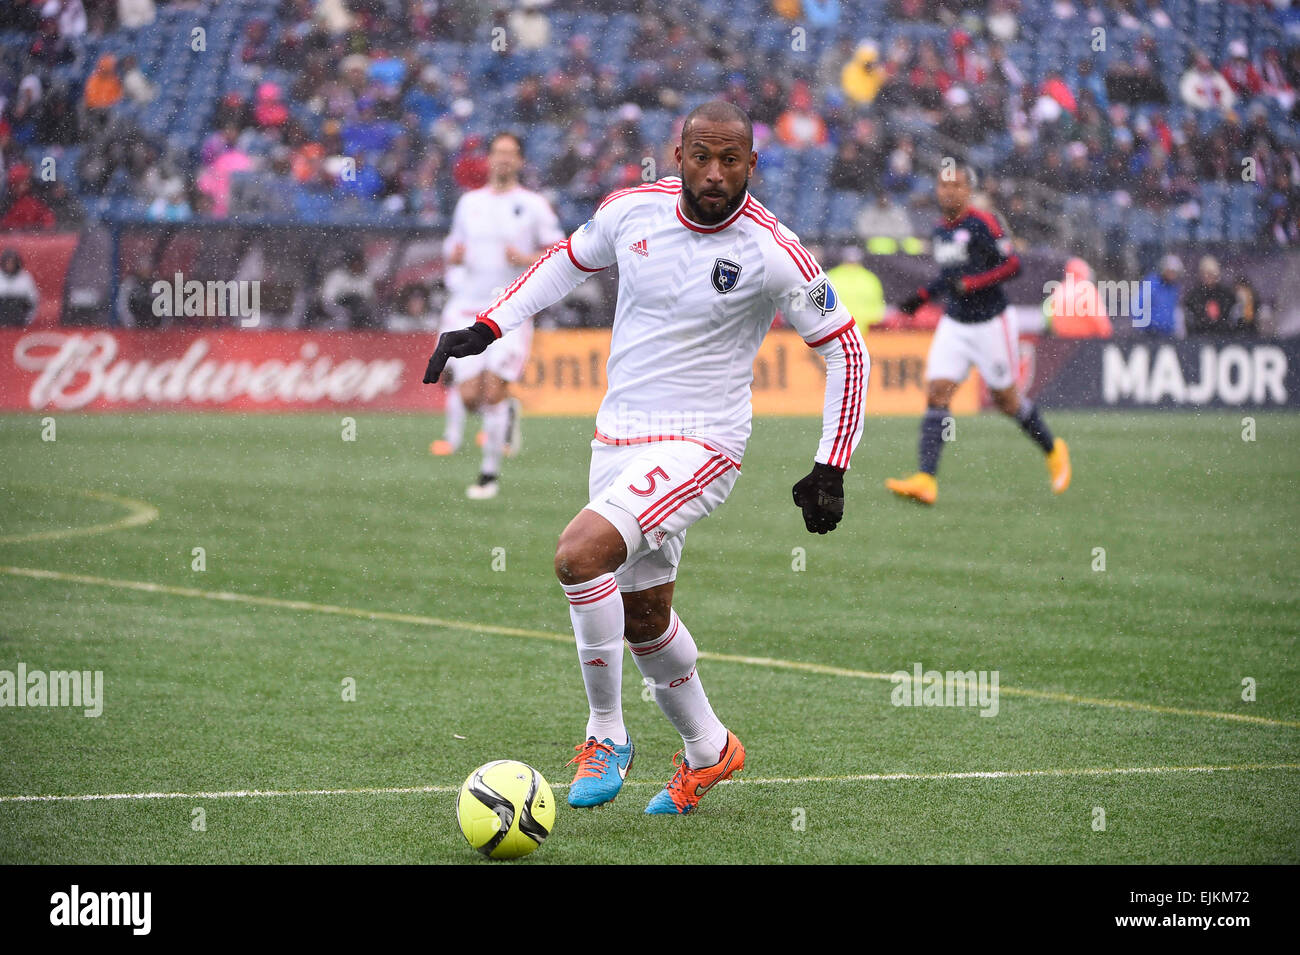 Foxborough, Massachusetts, USA. 28th Mar, 2015. San Jose Earthquakes defender Victor Bernardez (5) in game action during the MLS game between the San Jose Earthquakes and the New England Revolution held at Gillette Stadium in Foxborough Massachusetts. New England defeated San Jose 2-1. Eric Canha/CSM/Alamy Live News Stock Photo